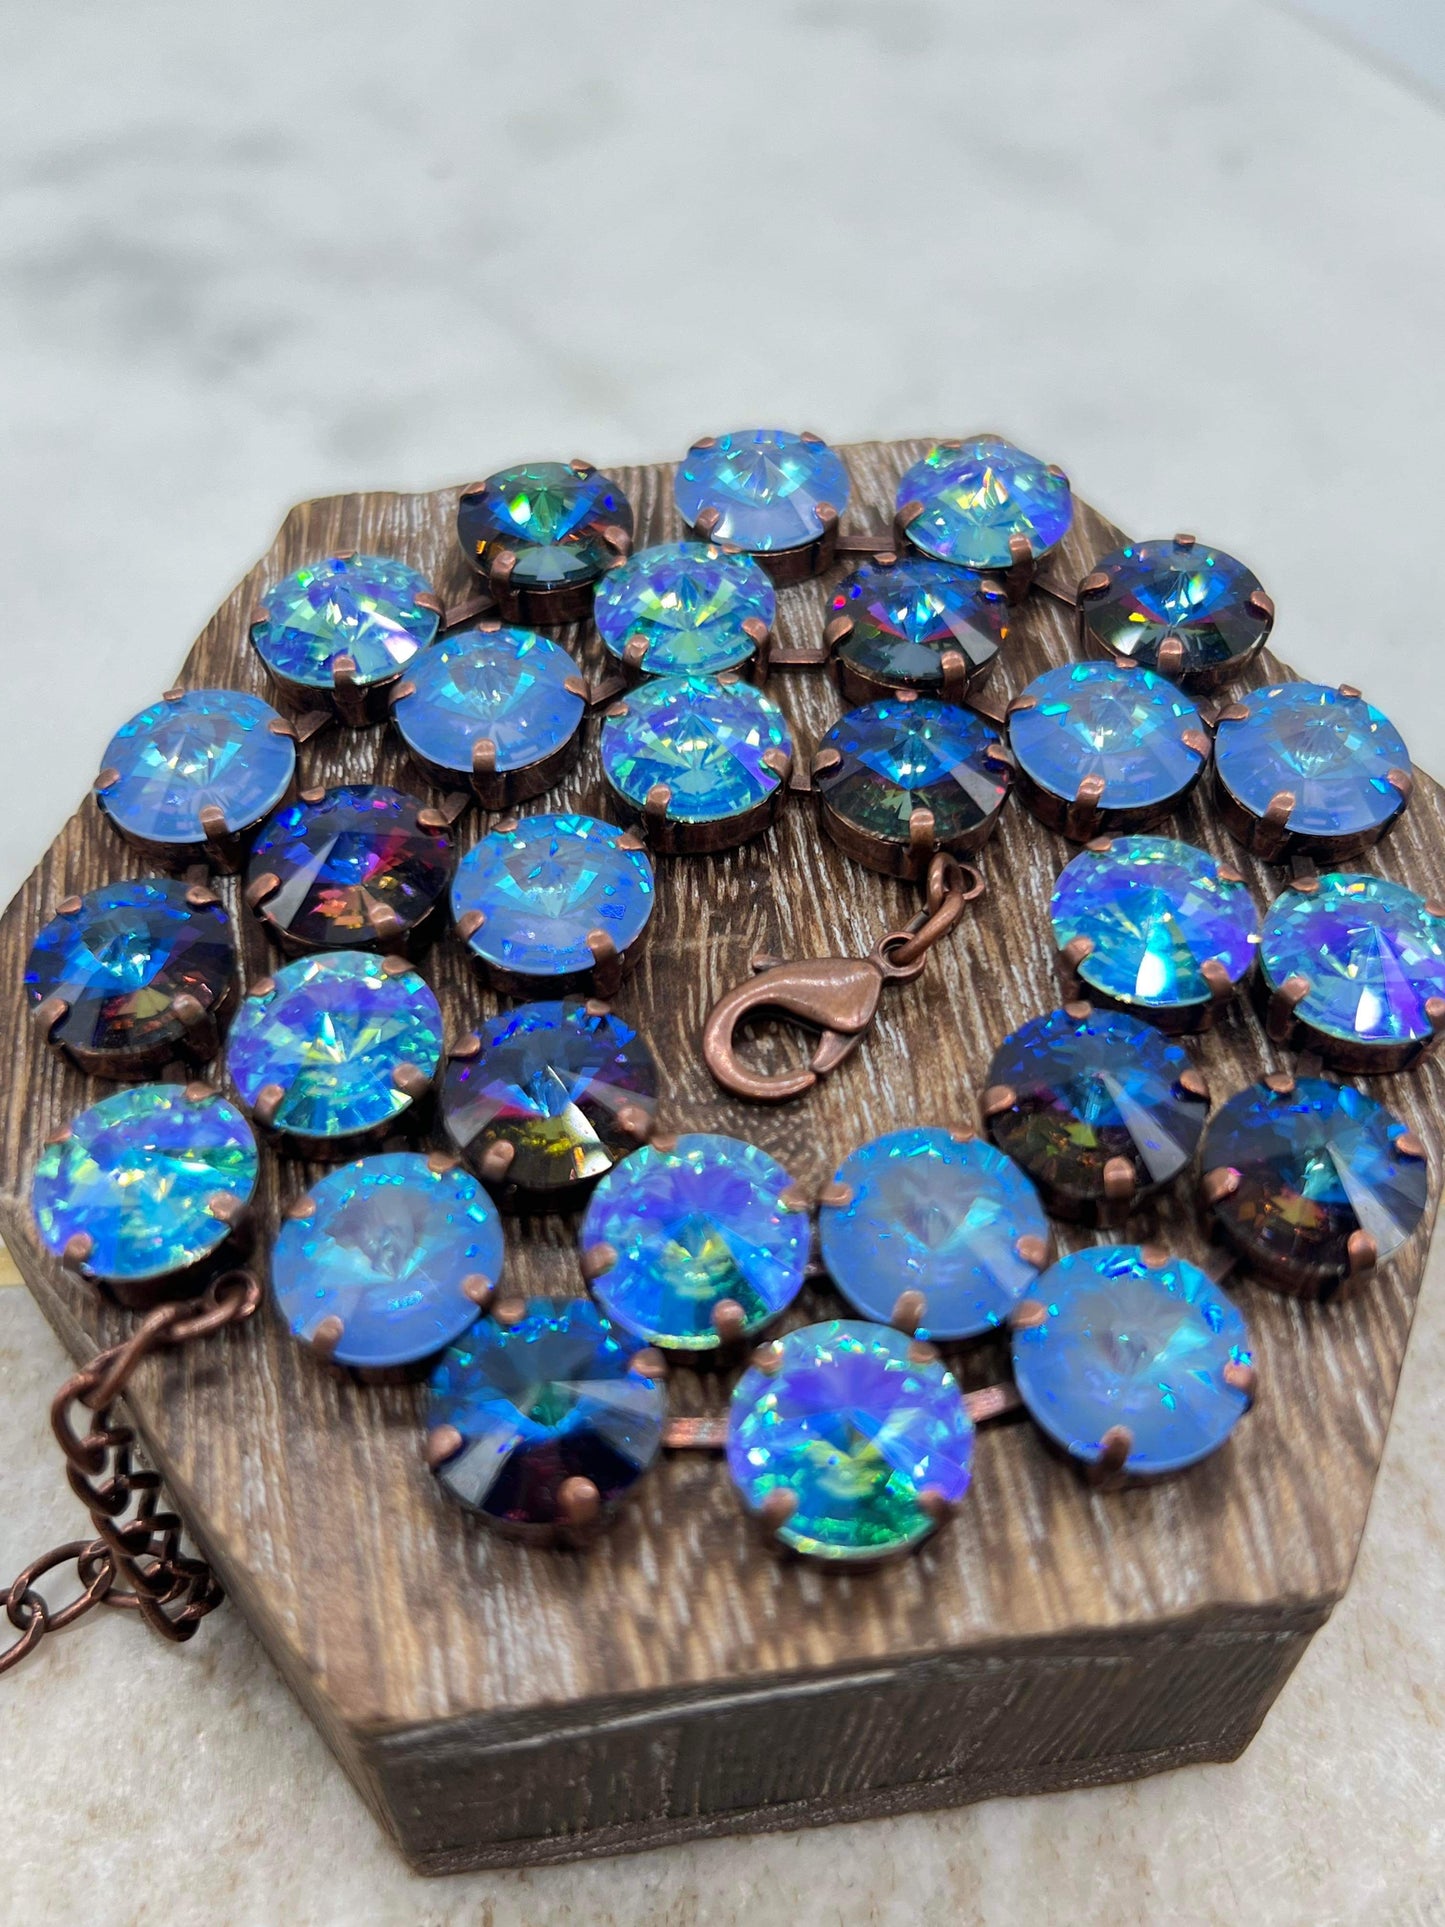 Midnight Blues Necklace